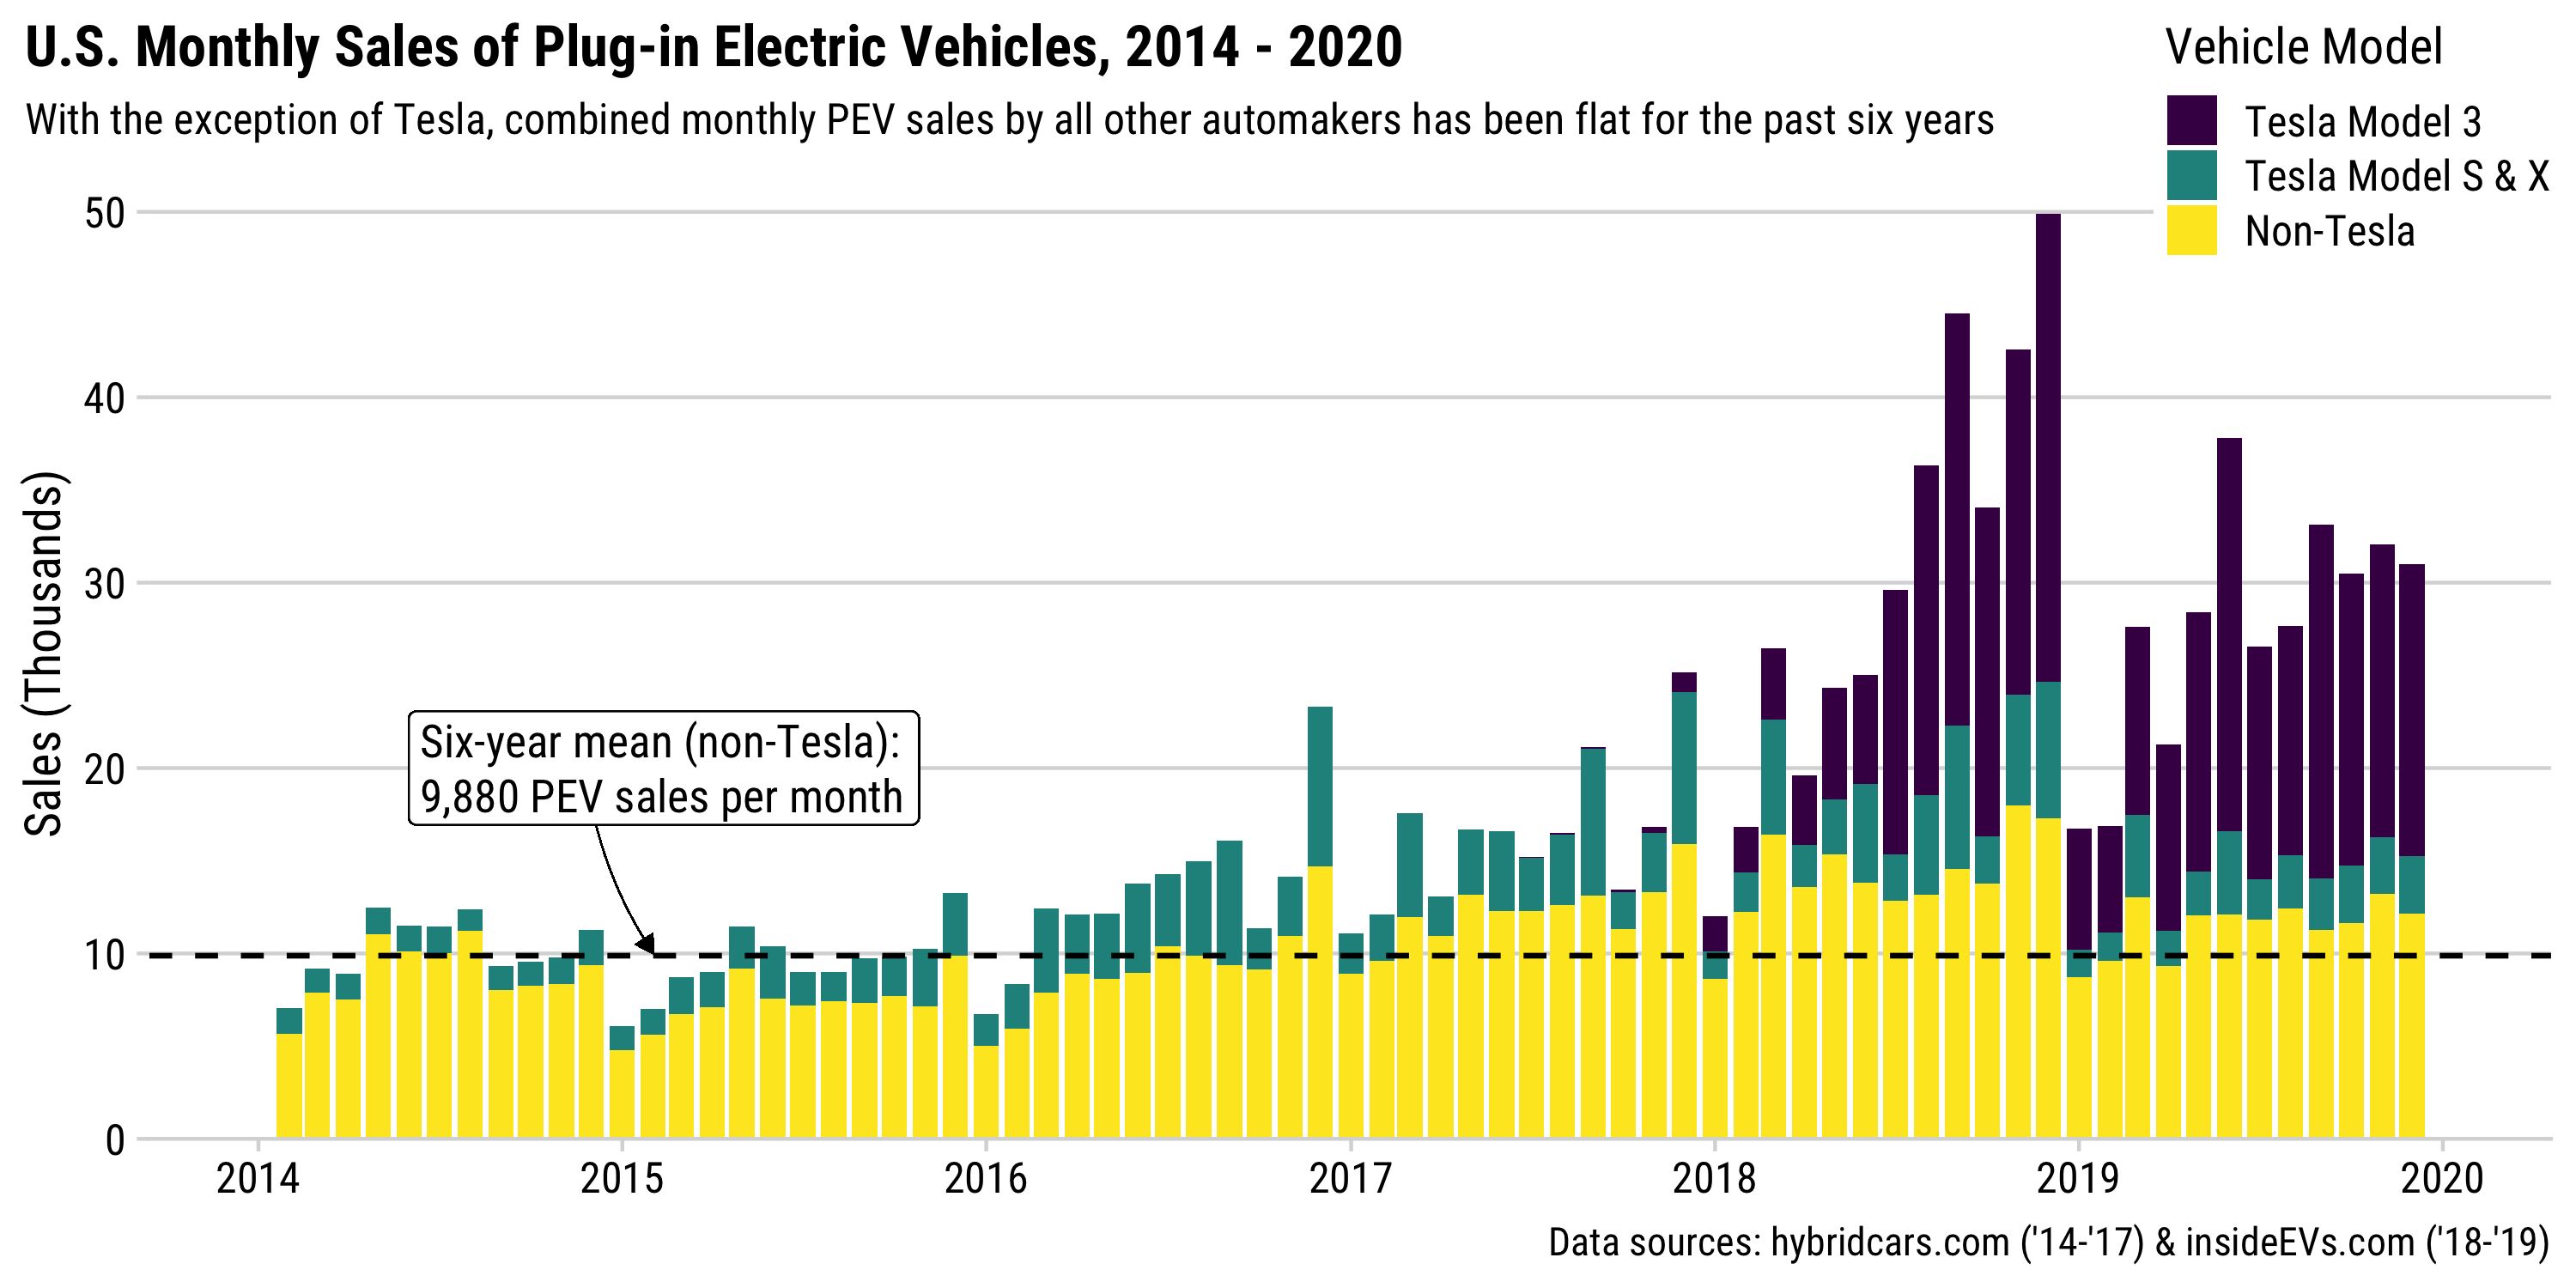 U.S. Monthly Sales of Plug-in Electric Vehicles, 2014 - 2020.